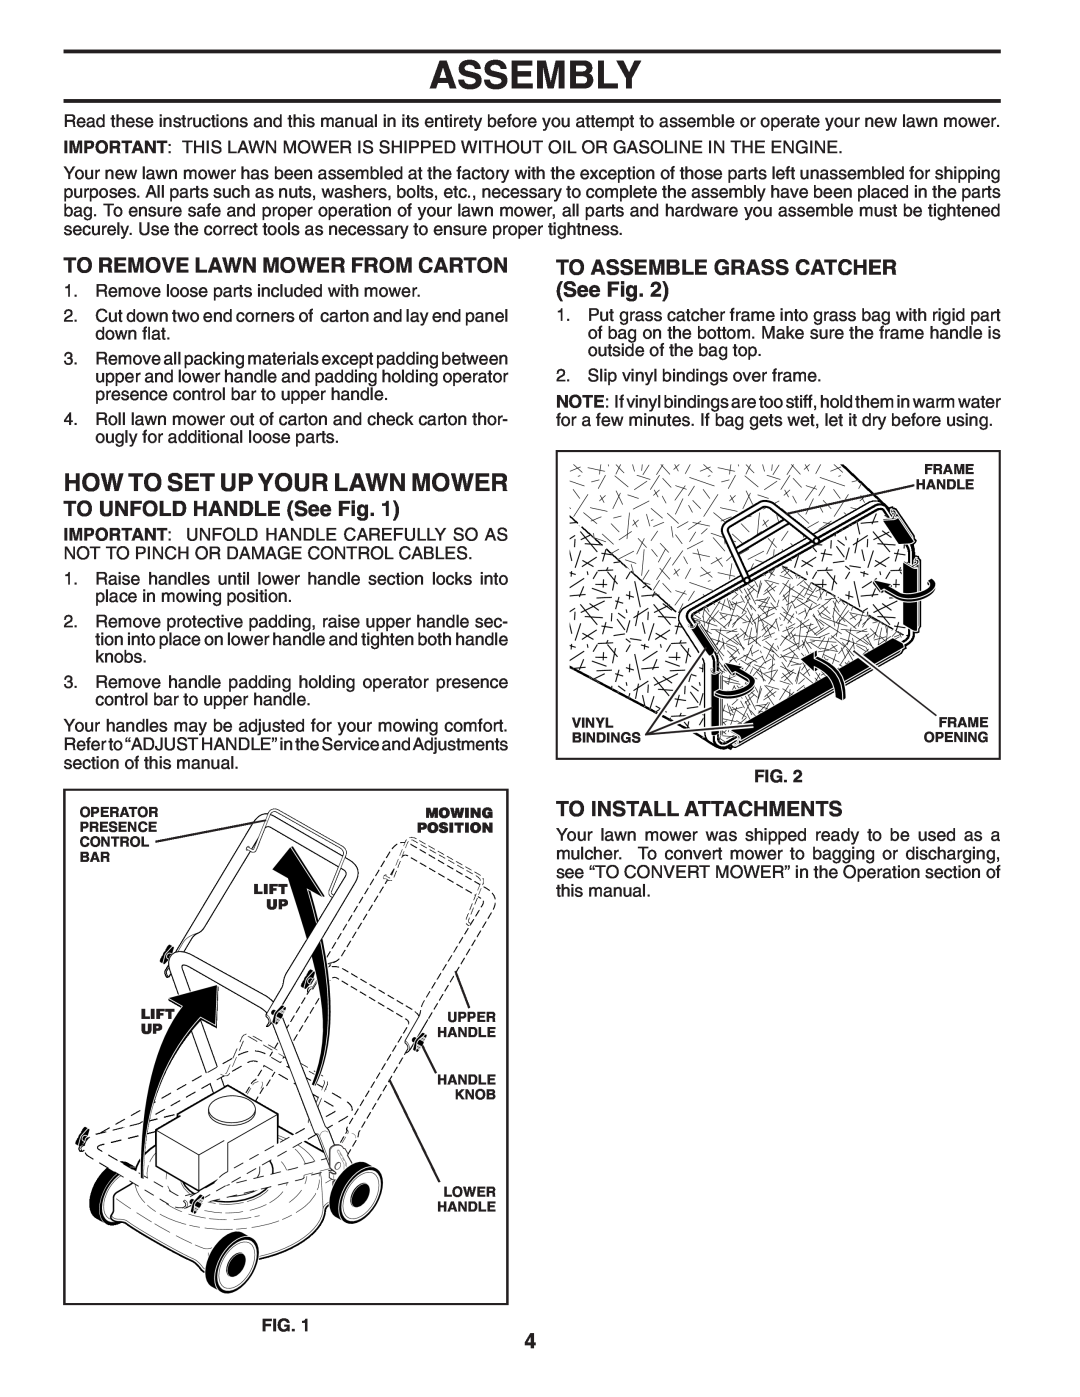 Husqvarna 6021P manual Assembly, How To Set Up Your Lawn Mower, To Remove Lawn Mower From Carton, TO UNFOLD HANDLE See Fig 